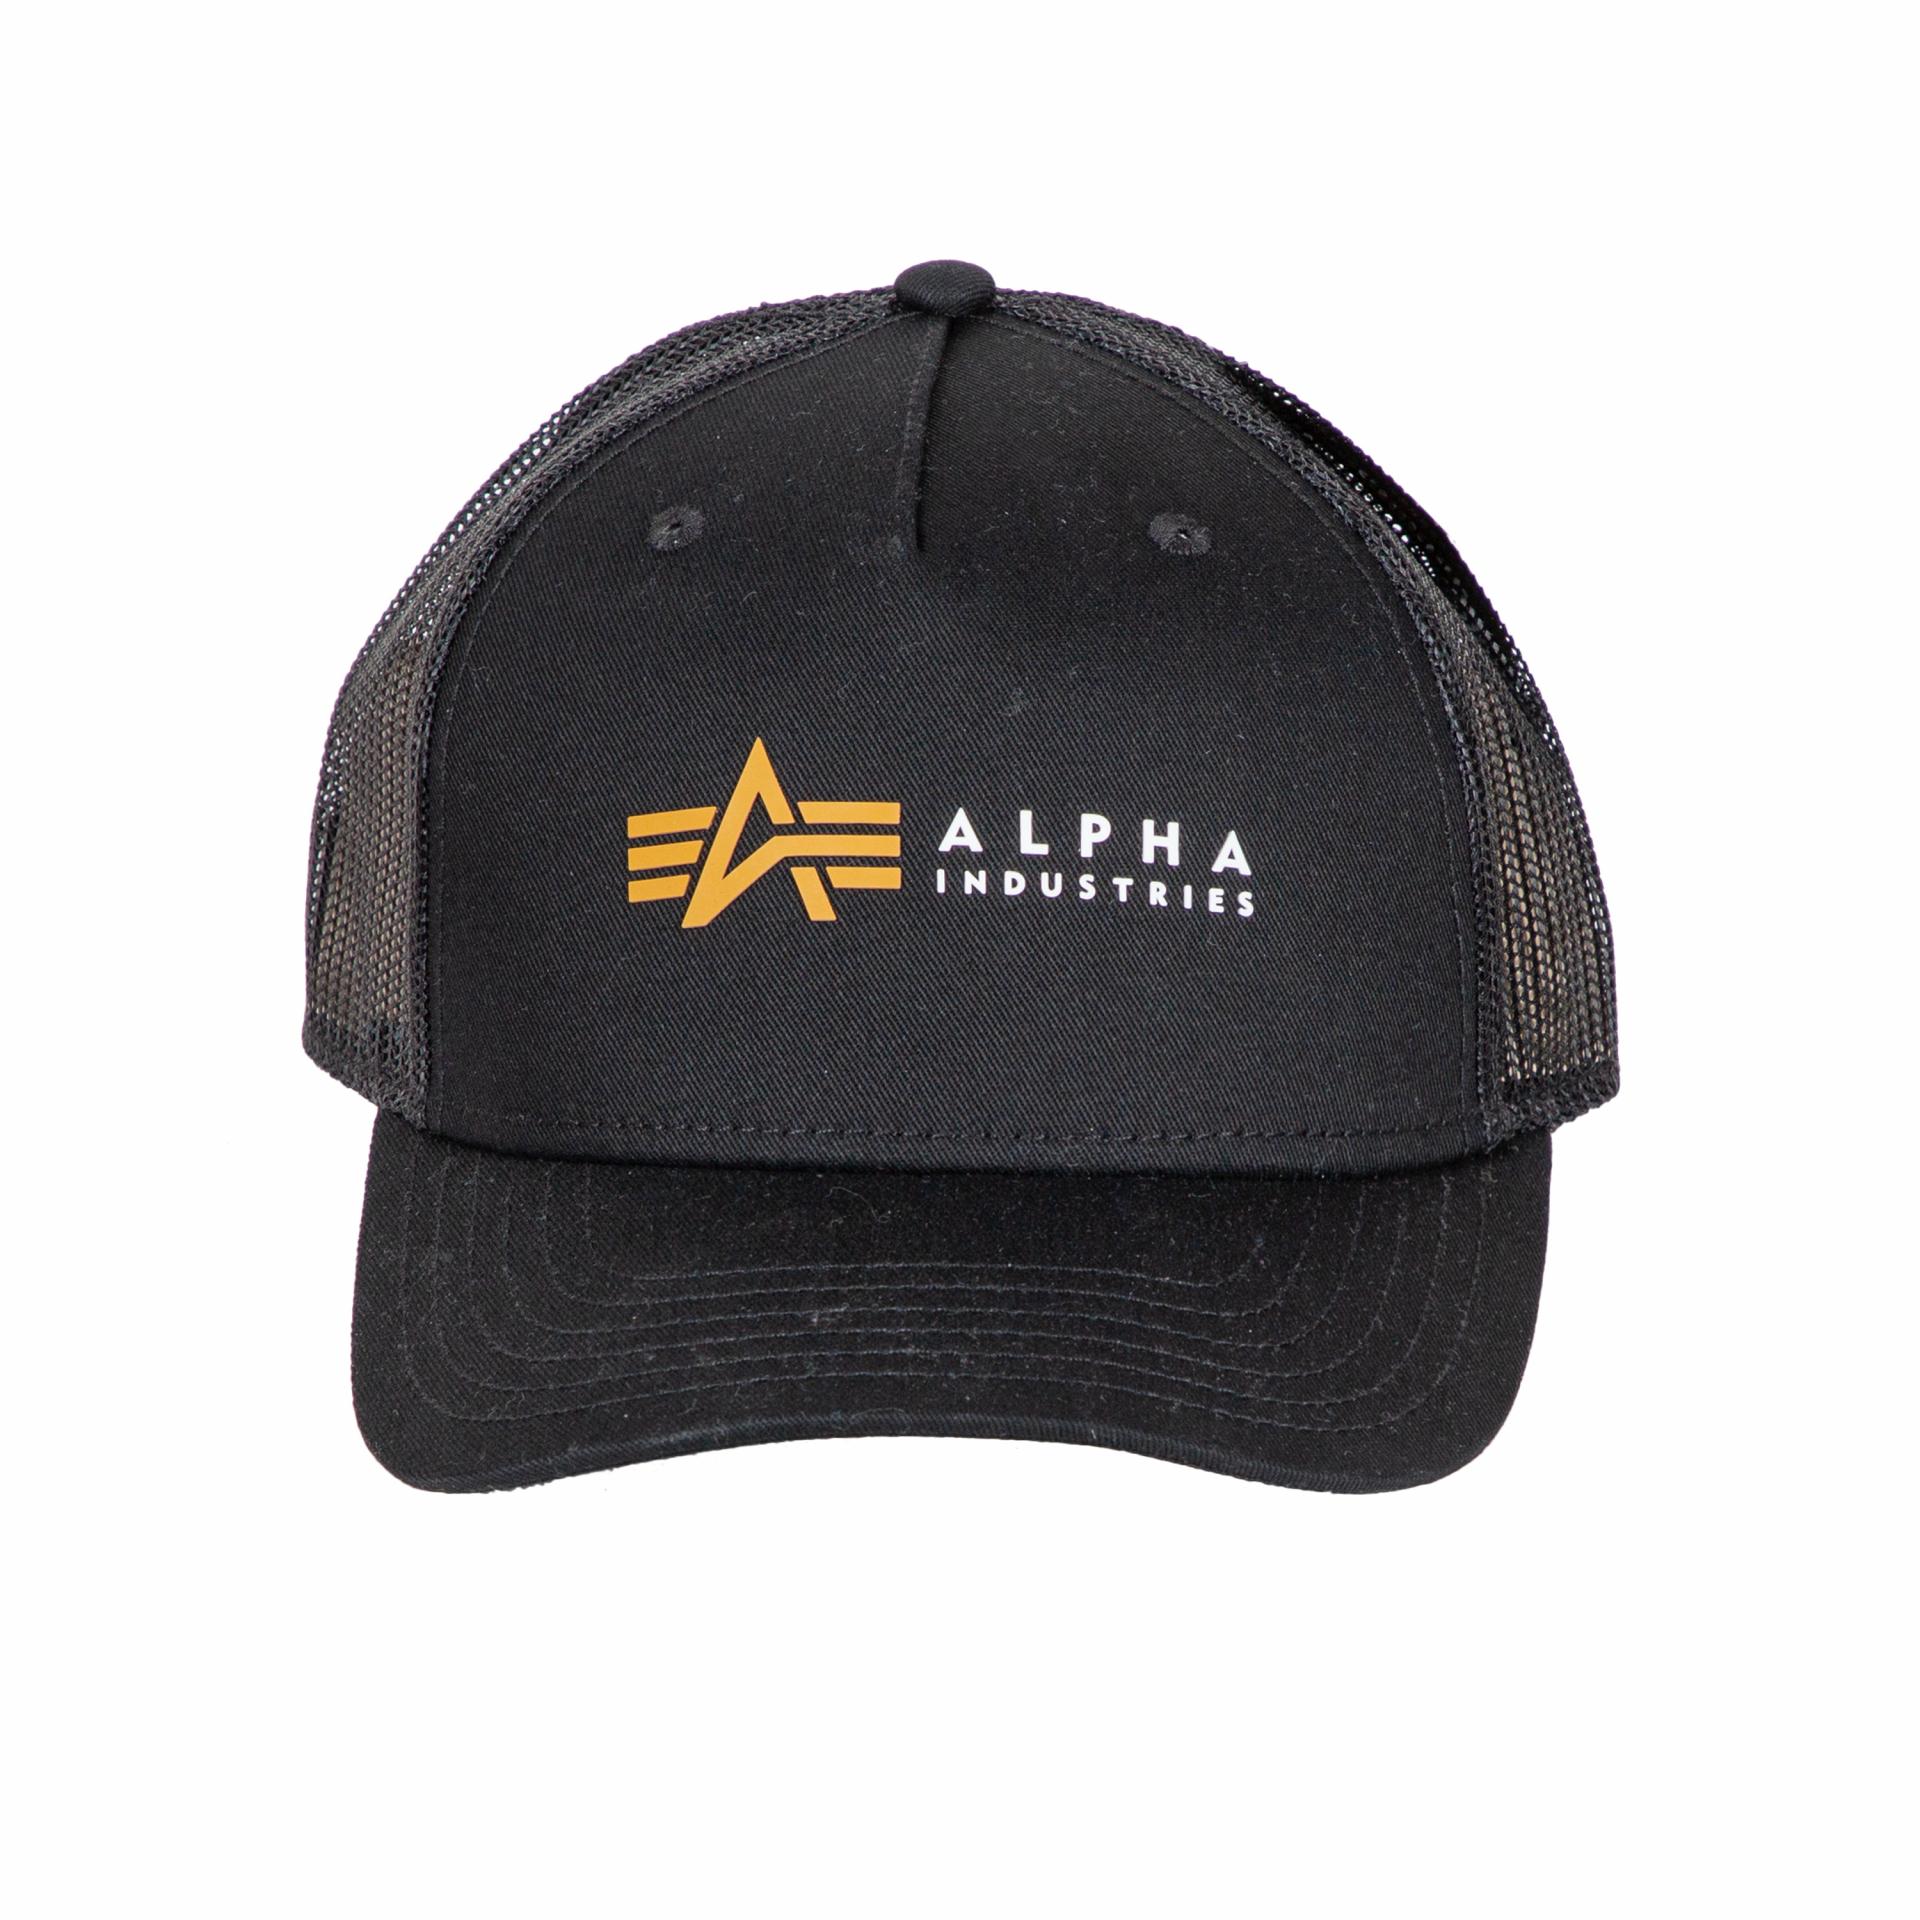 CAPS/HATS Archives - Alpha Cyprus Industries